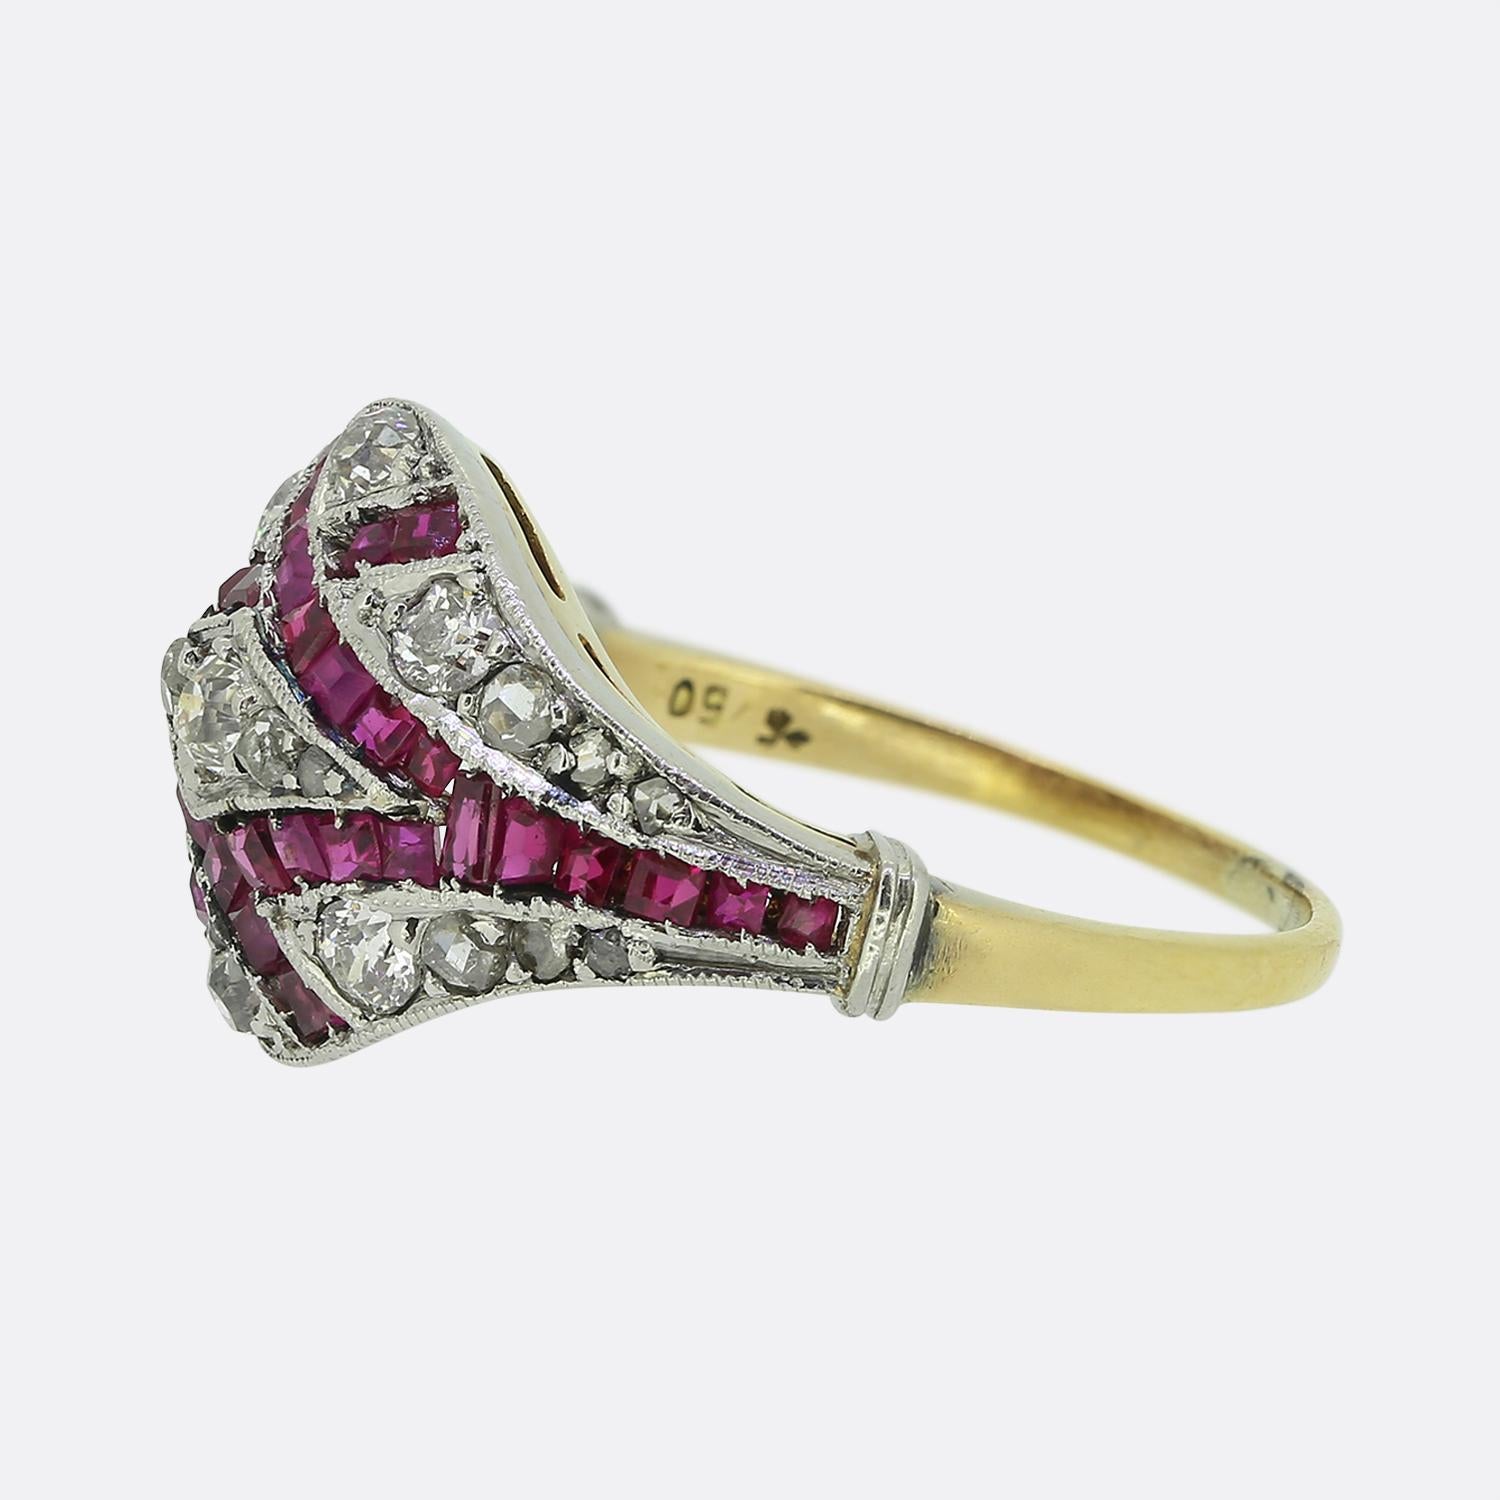 Here we have an outstanding ruby and diamond bombe ring crafted at a time when the Art Deco style was at the height of design. A concave domed shaped face plays host a stunning ensemble of rubies and diamonds. Expertly hand crafted fine milgrain